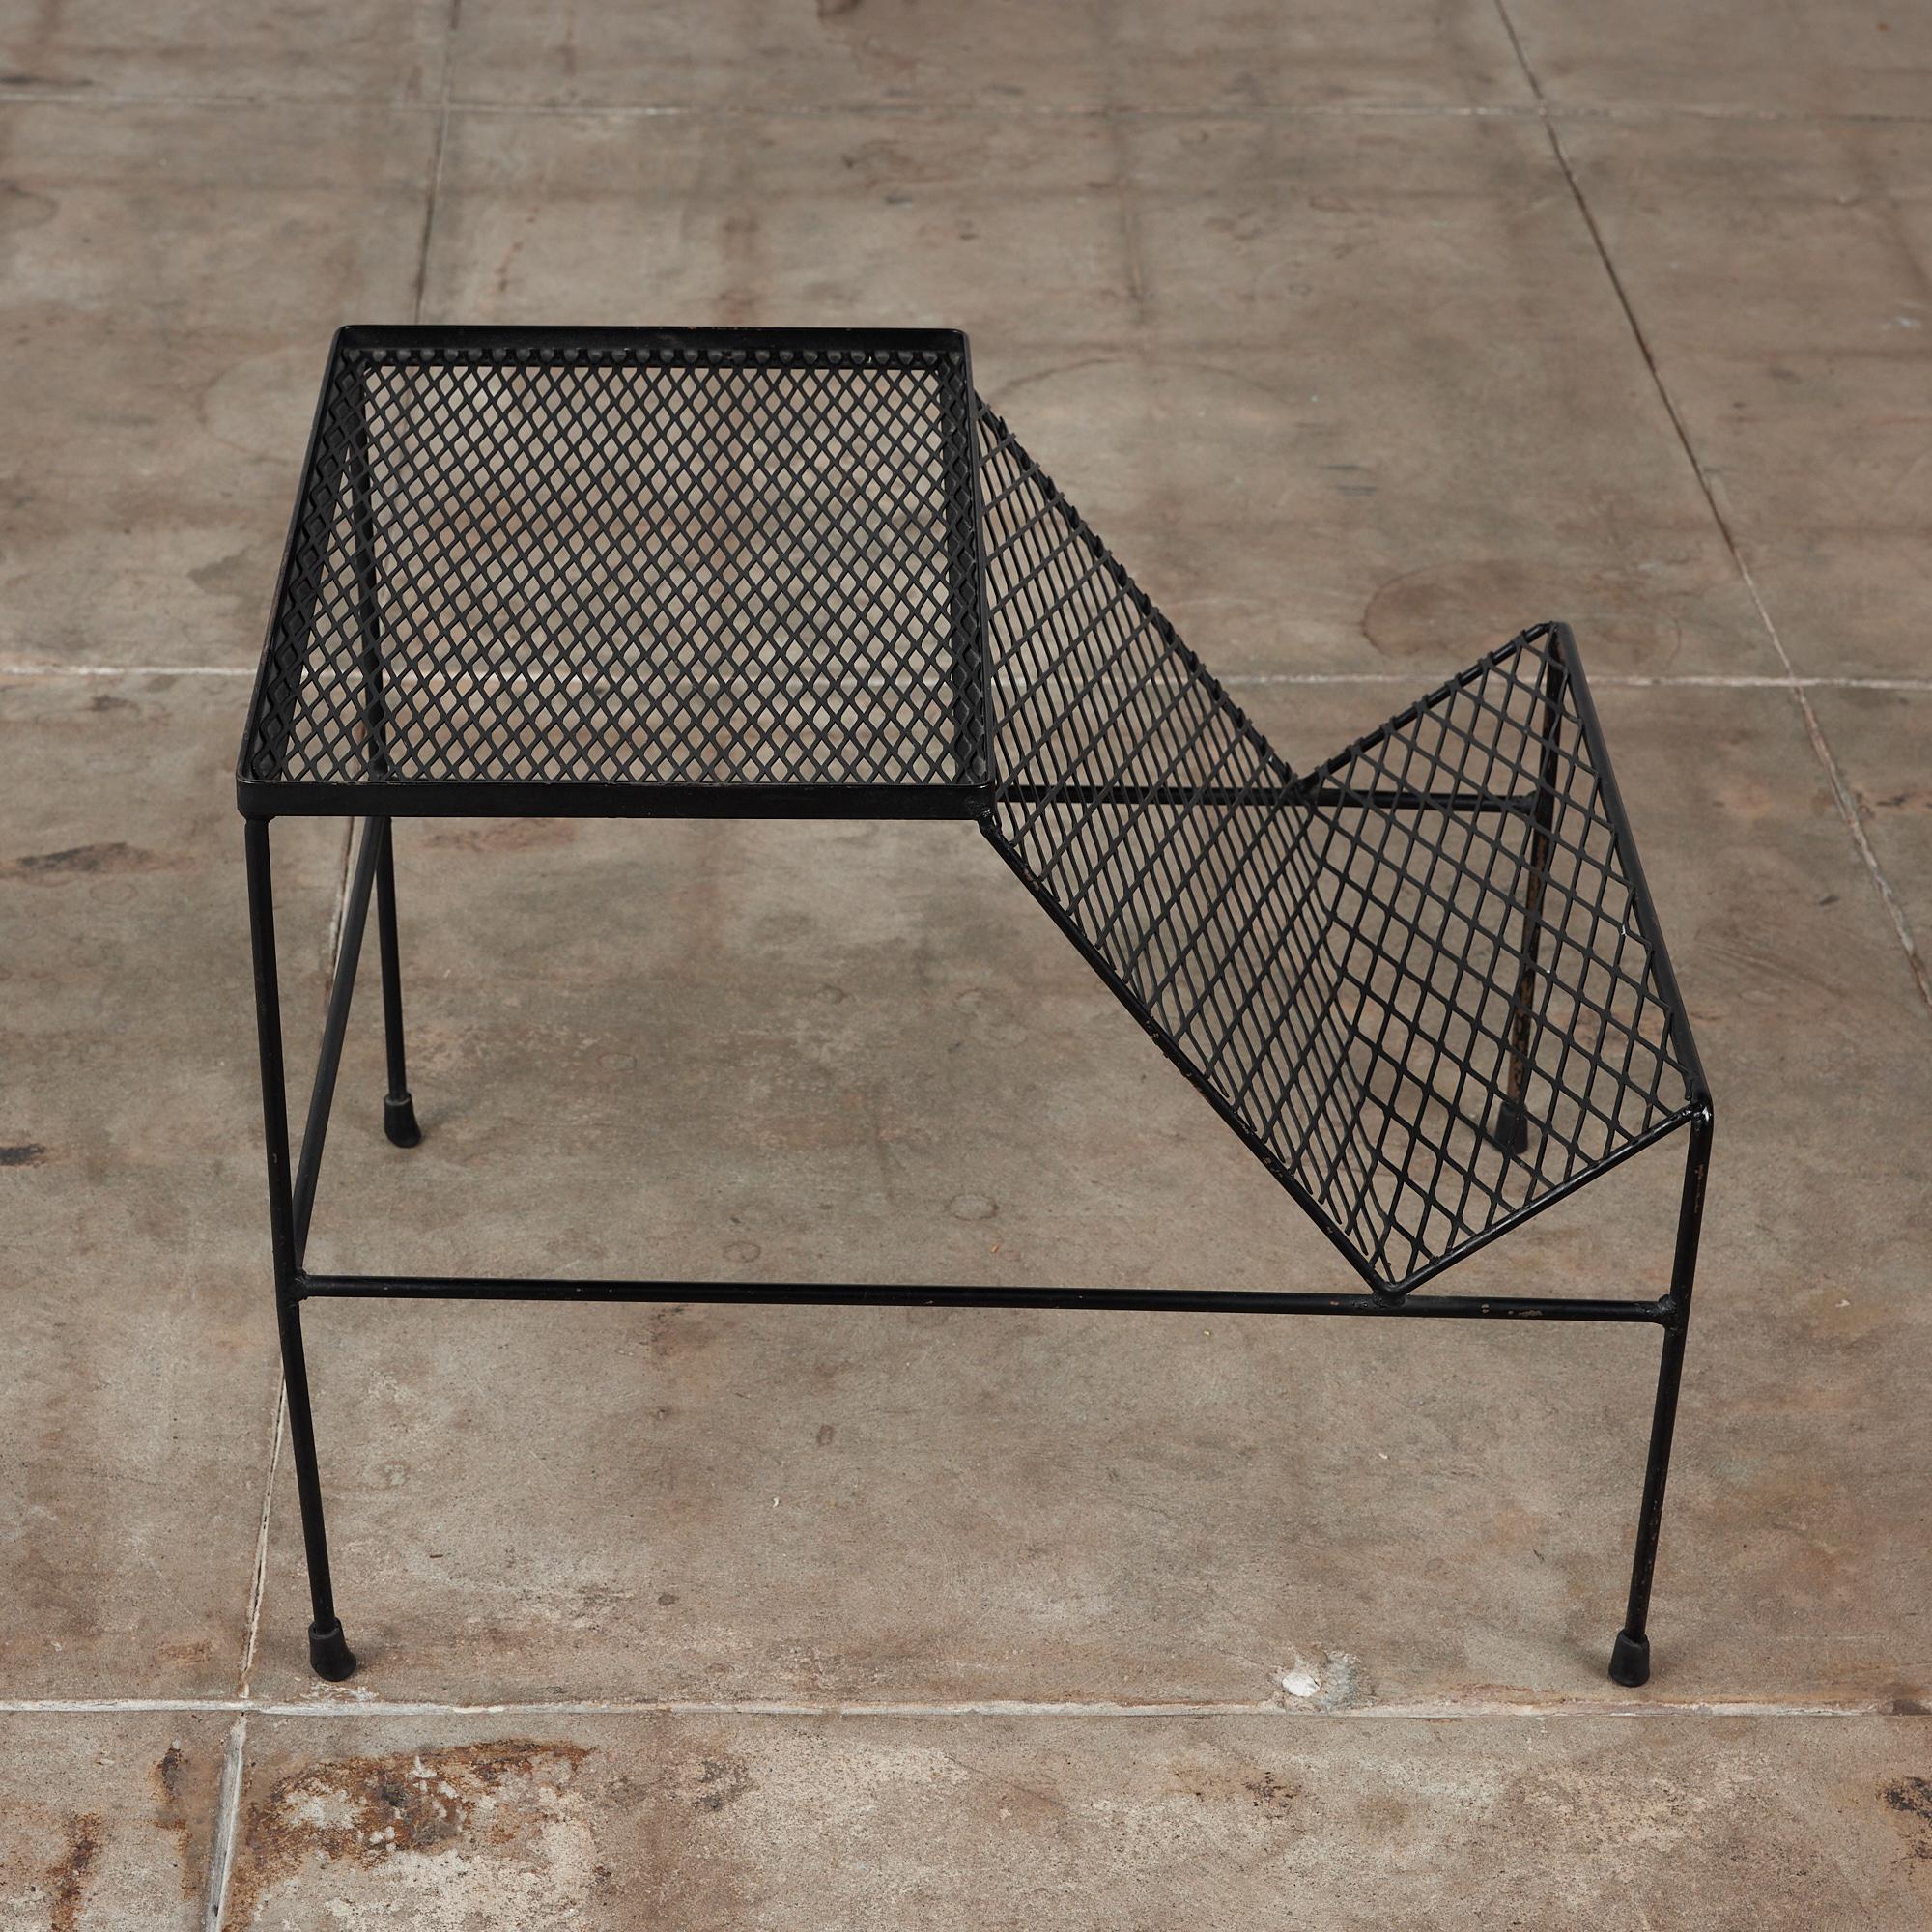 20th Century Expanded Metal Side Table with Magazine Rack